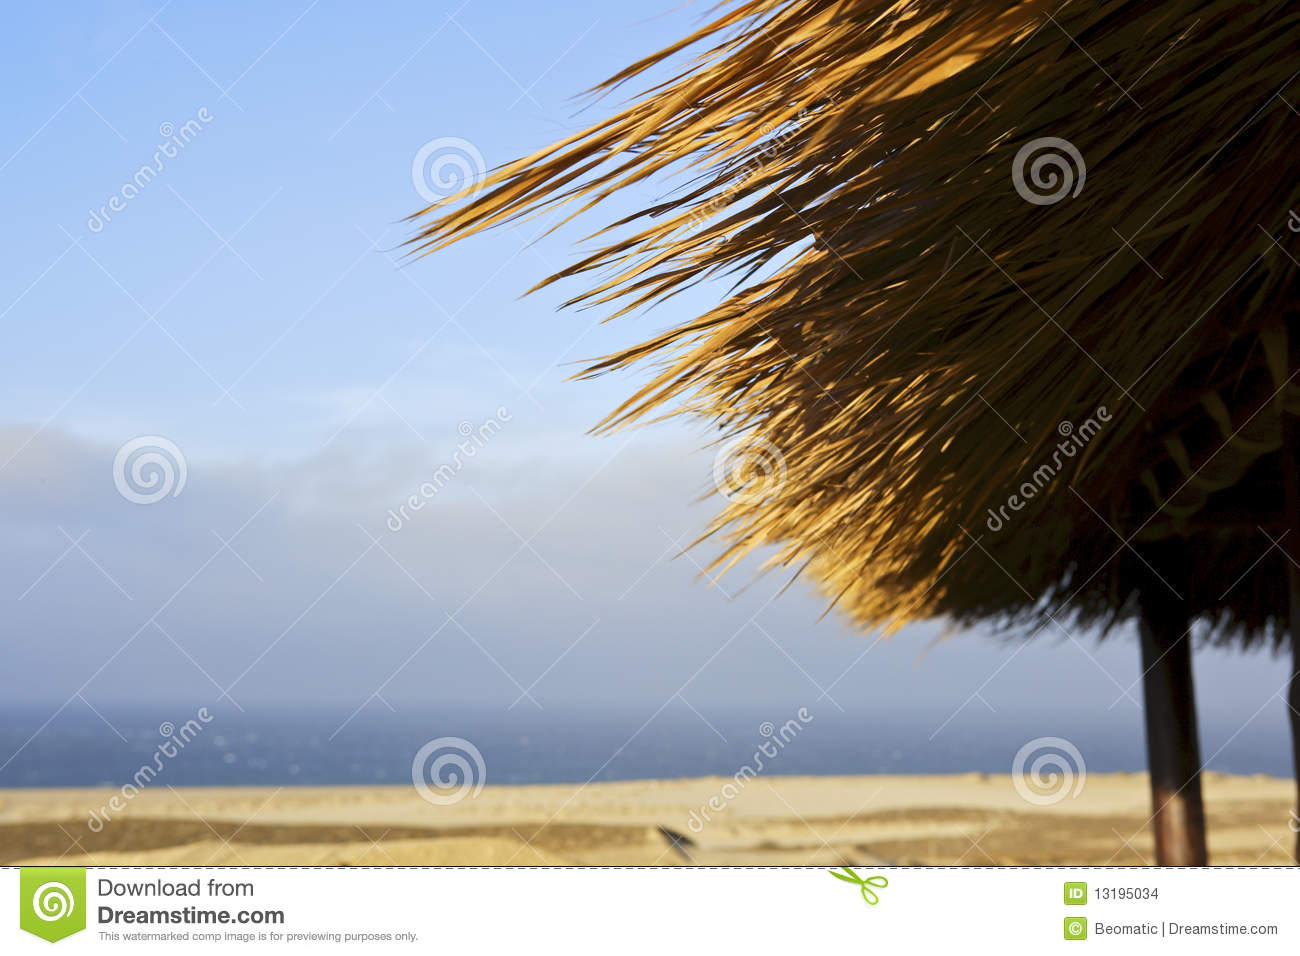 The Roof Of A Grass Hut With An Idyllic Sandy Beach In The Background